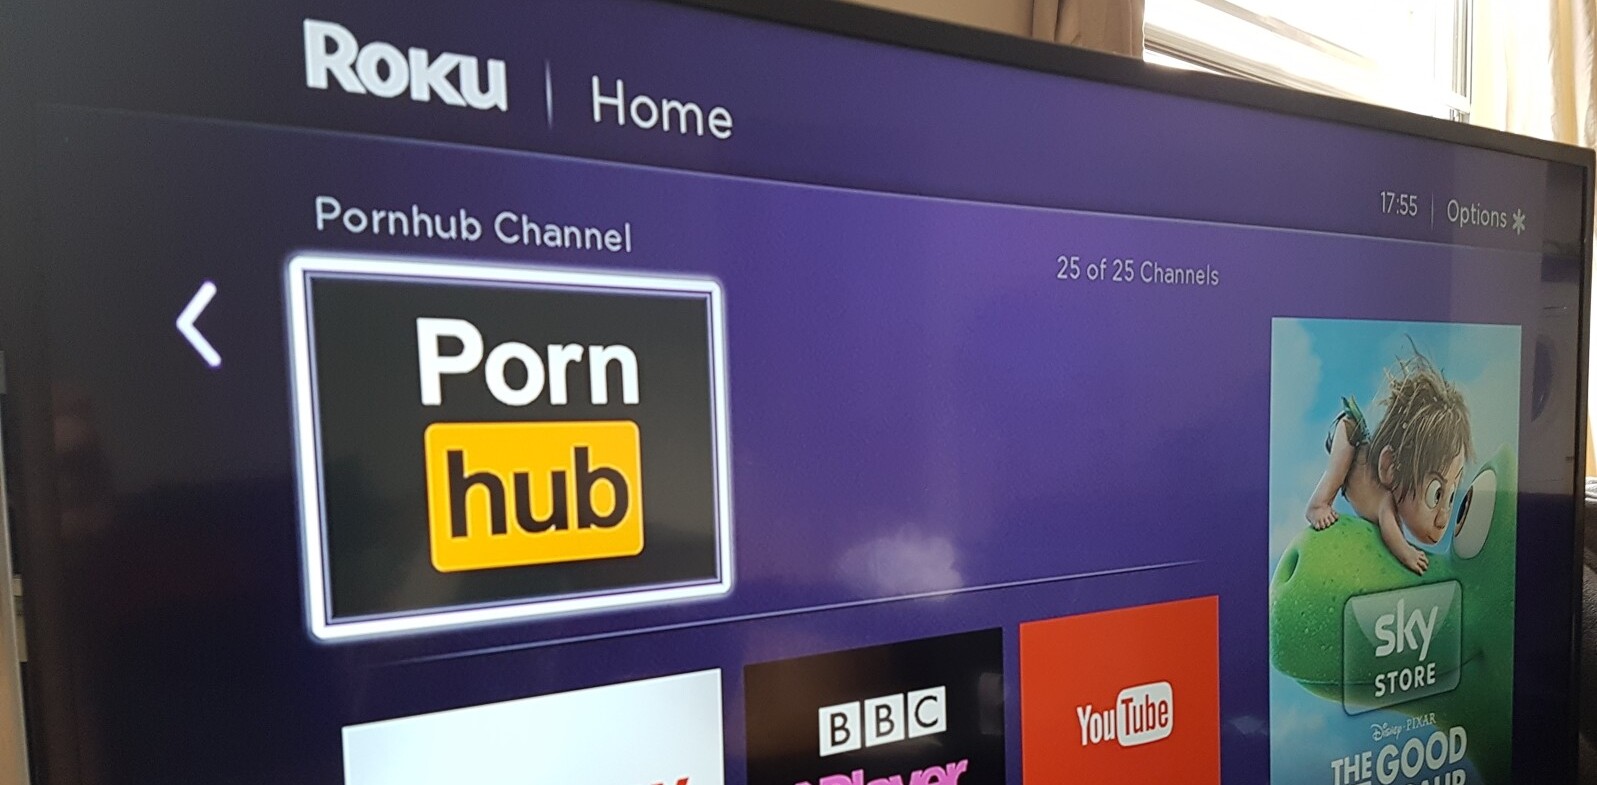 You can now watch Pornhub on your TV for free